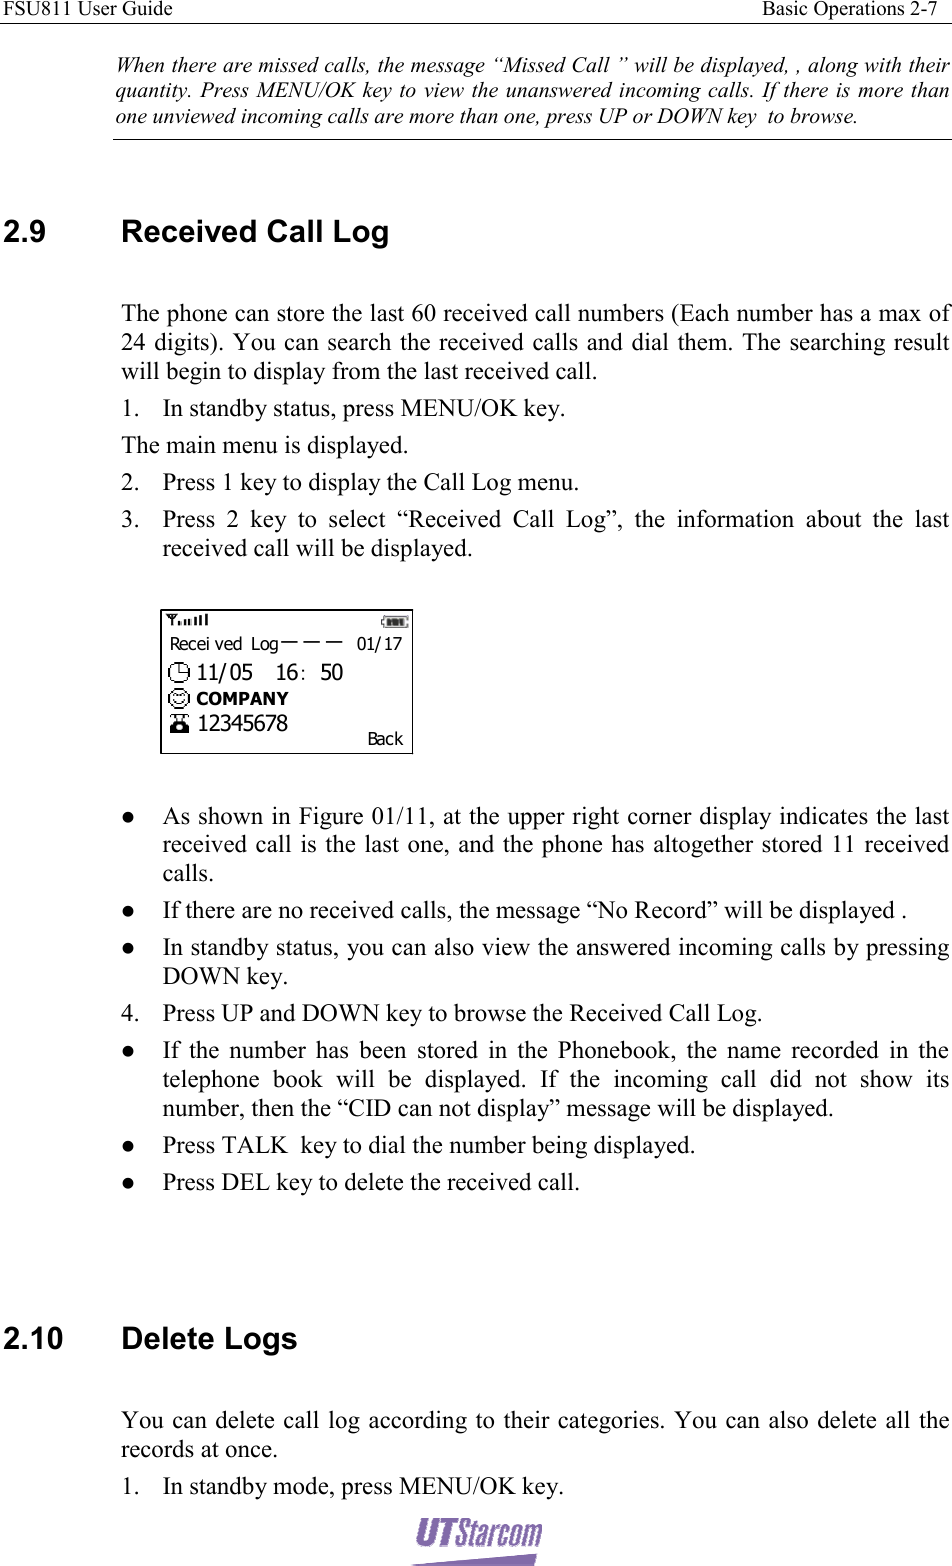 FSU811 User Guide                                                                                                                 Basic Operations 2-7  When there are missed calls, the message “Missed Call ” will be displayed, , along with their quantity. Press MENU/OK key to view the unanswered incoming calls. If there is more than one unviewed incoming calls are more than one, press UP or DOWN key  to browse.  2.9  Received Call Log  The phone can store the last 60 received call numbers (Each number has a max of 24 digits). You can search the received calls and dial them. The searching result will begin to display from the last received call. 1. In standby status, press MENU/OK key. The main menu is displayed. 2. Press 1 key to display the Call Log menu. 3. Press 2 key to select “Received Call Log”, the information about the last received call will be displayed.  Bac kRec ei v ed L og－－－ 01/ 1711/ 05  16：5012345678COMPANY  z As shown in Figure 01/11, at the upper right corner display indicates the last received call is the last one, and the phone has altogether stored 11 received calls. z If there are no received calls, the message “No Record” will be displayed . z In standby status, you can also view the answered incoming calls by pressing DOWN key. 4. Press UP and DOWN key to browse the Received Call Log. z If the number has been stored in the Phonebook, the name recorded in the telephone book will be displayed. If the incoming call did not show its number, then the “CID can not display” message will be displayed. z Press TALK  key to dial the number being displayed. z Press DEL key to delete the received call.    2.10 Delete Logs  You can delete call log according to their categories. You can also delete all the records at once. 1. In standby mode, press MENU/OK key. 